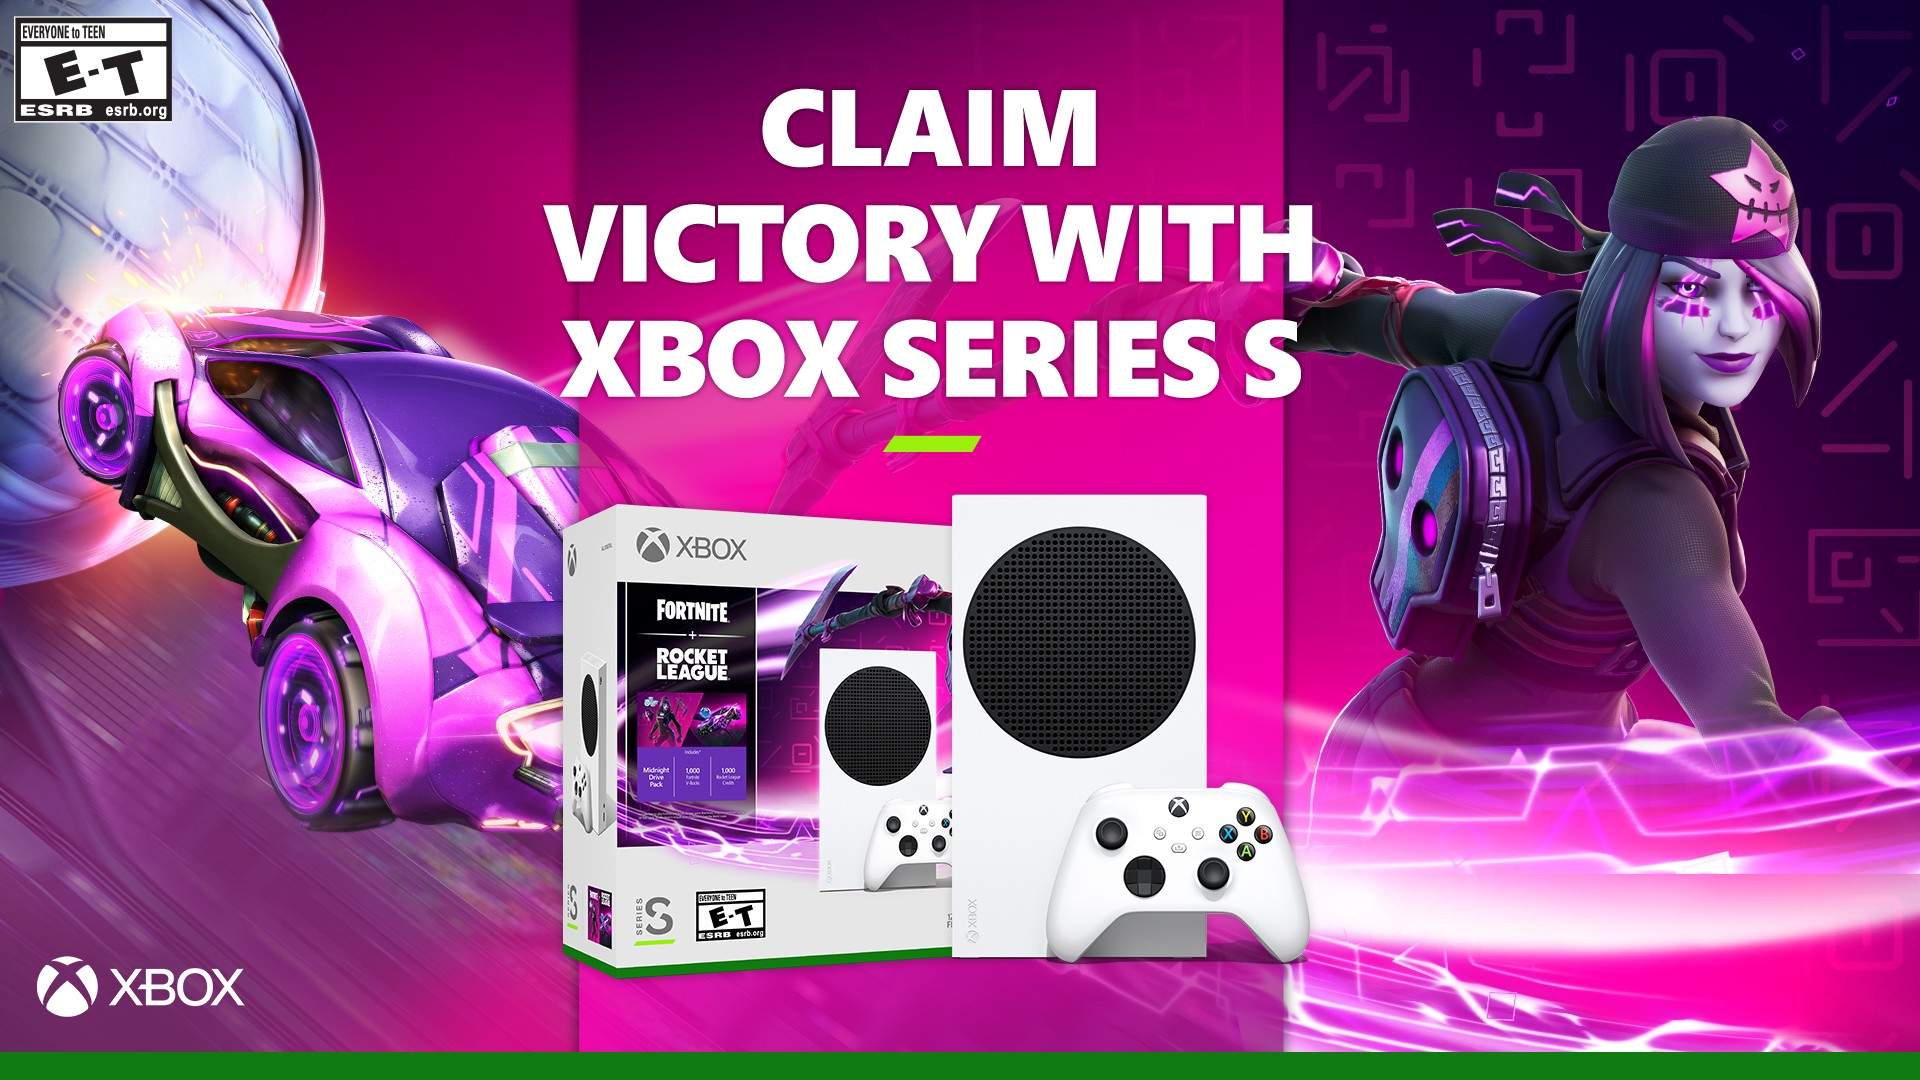 Claim Victory with the New Xbox Series S – Fortnite and Rocket League Bundle